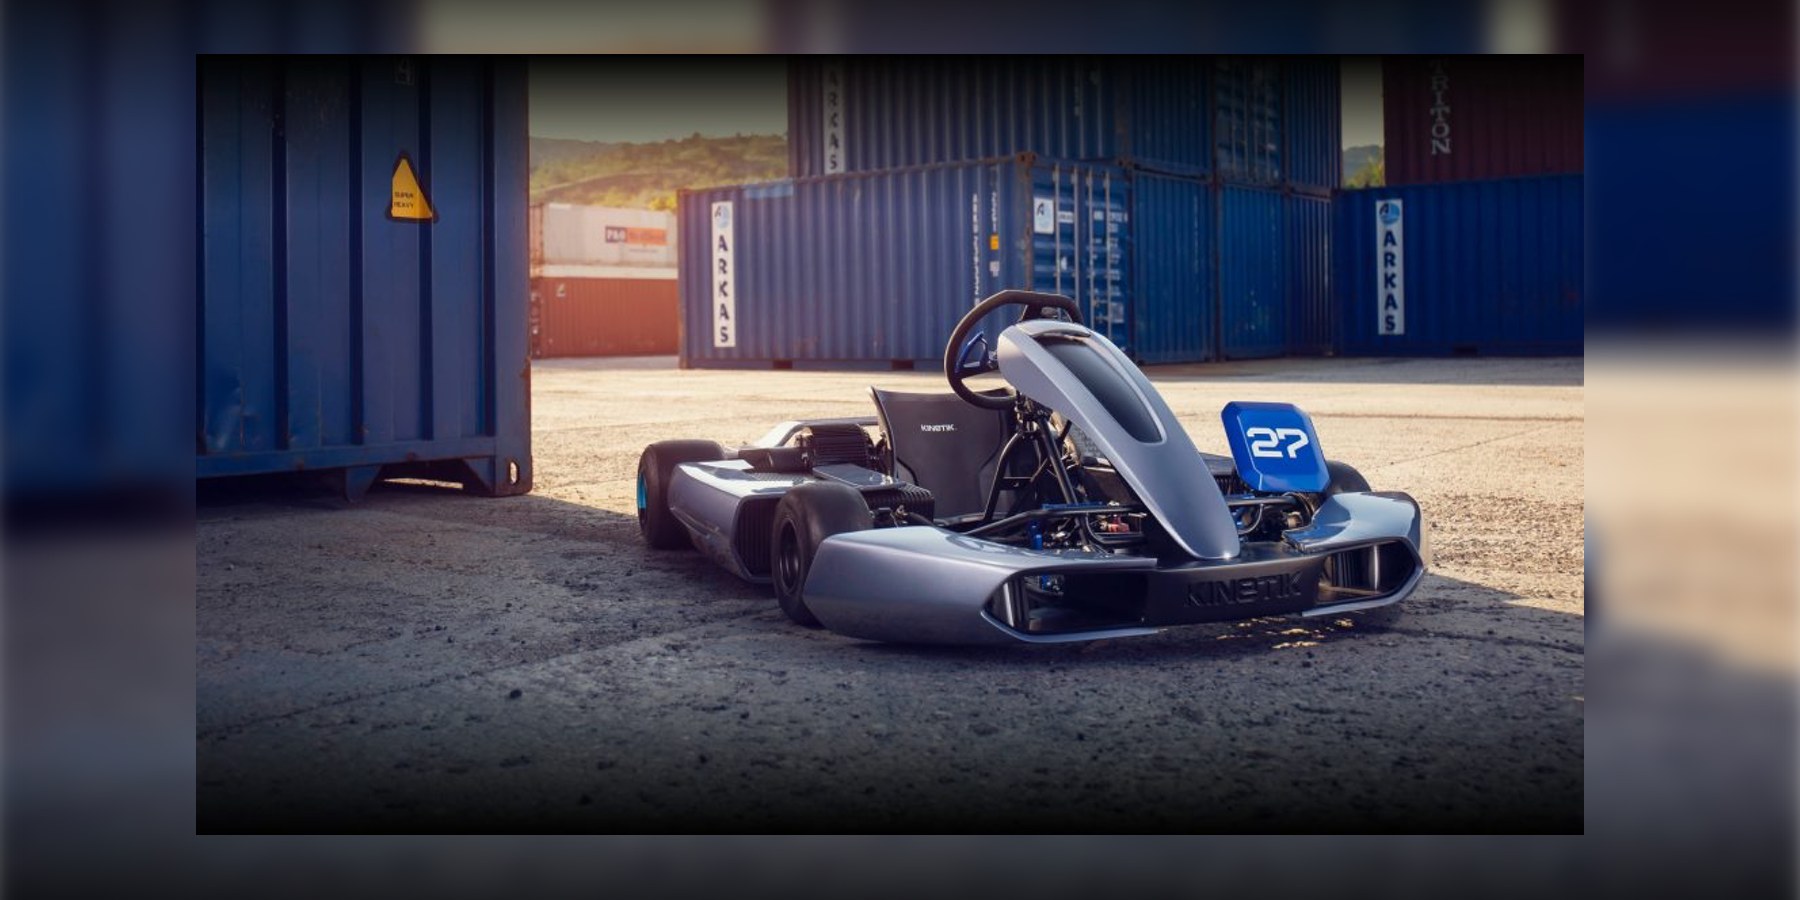 Kinetik's epic-looking 60 MPH electric go-kart is headed for production